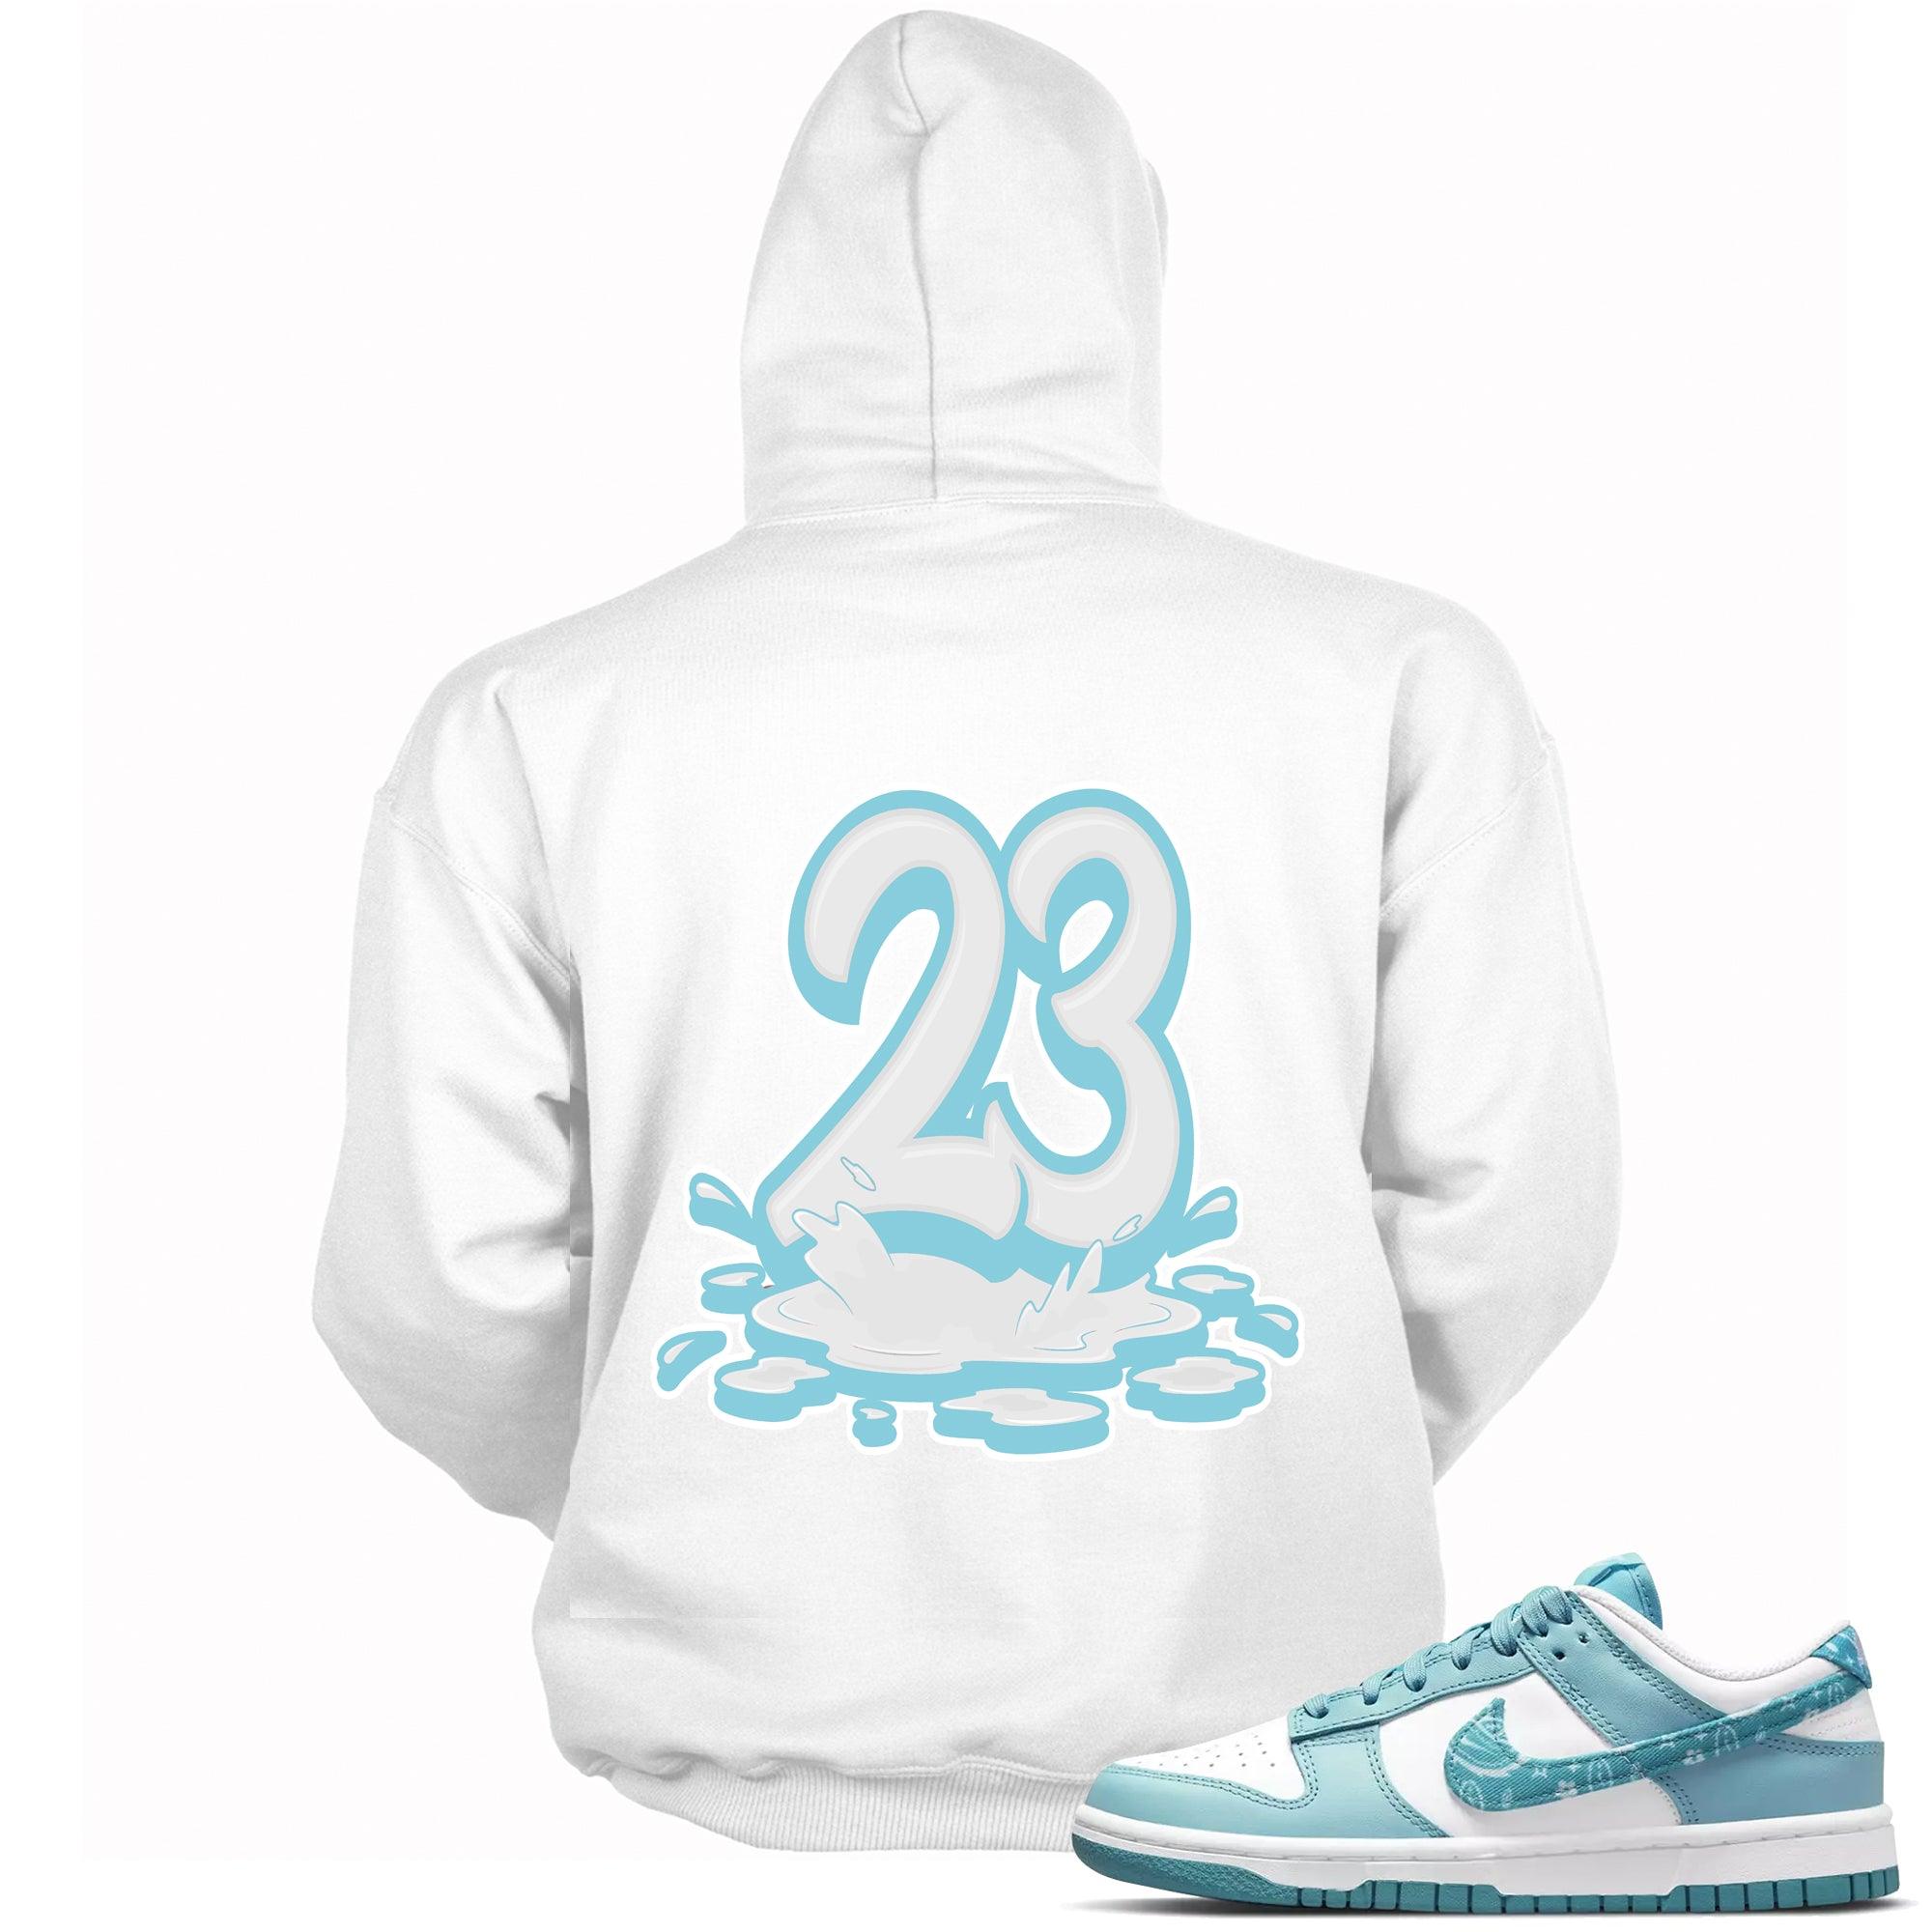 Number 23 Melting Hoodie Dunk Low Essential Paisley Pack Worn Blue photo